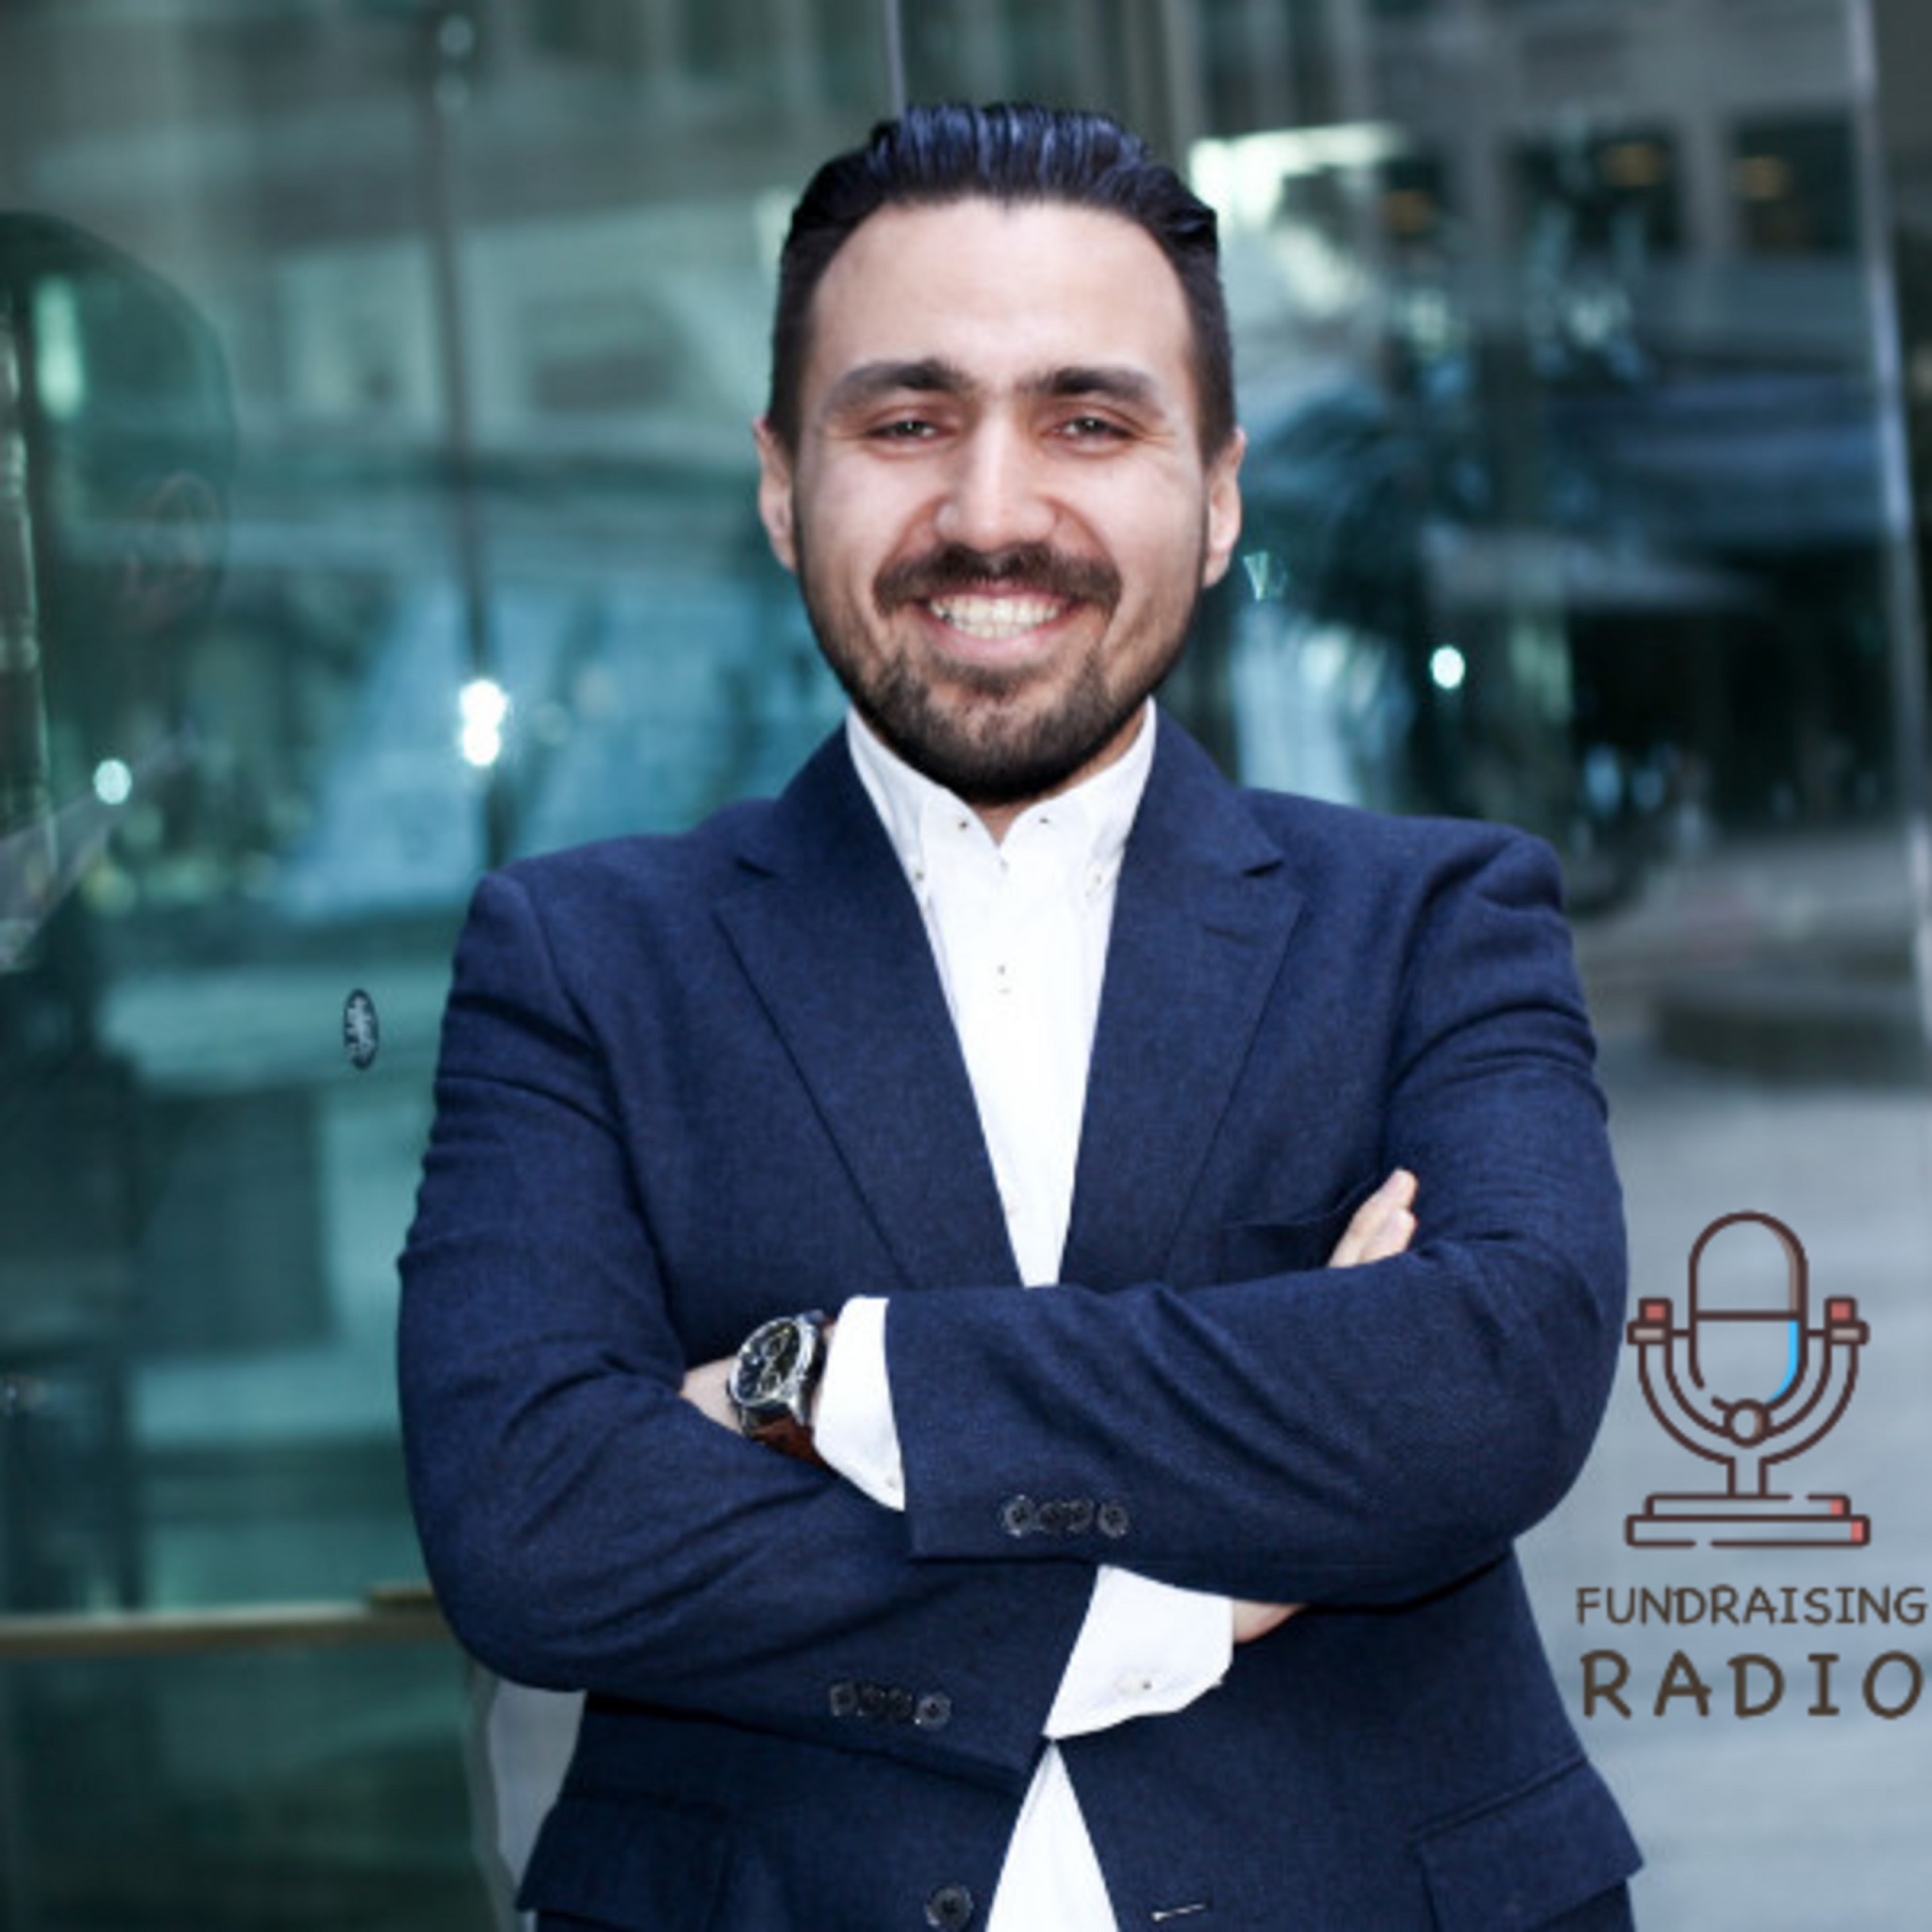 Saeed Zeinali’s Interview with Fundraising Radio on July 7, 2020